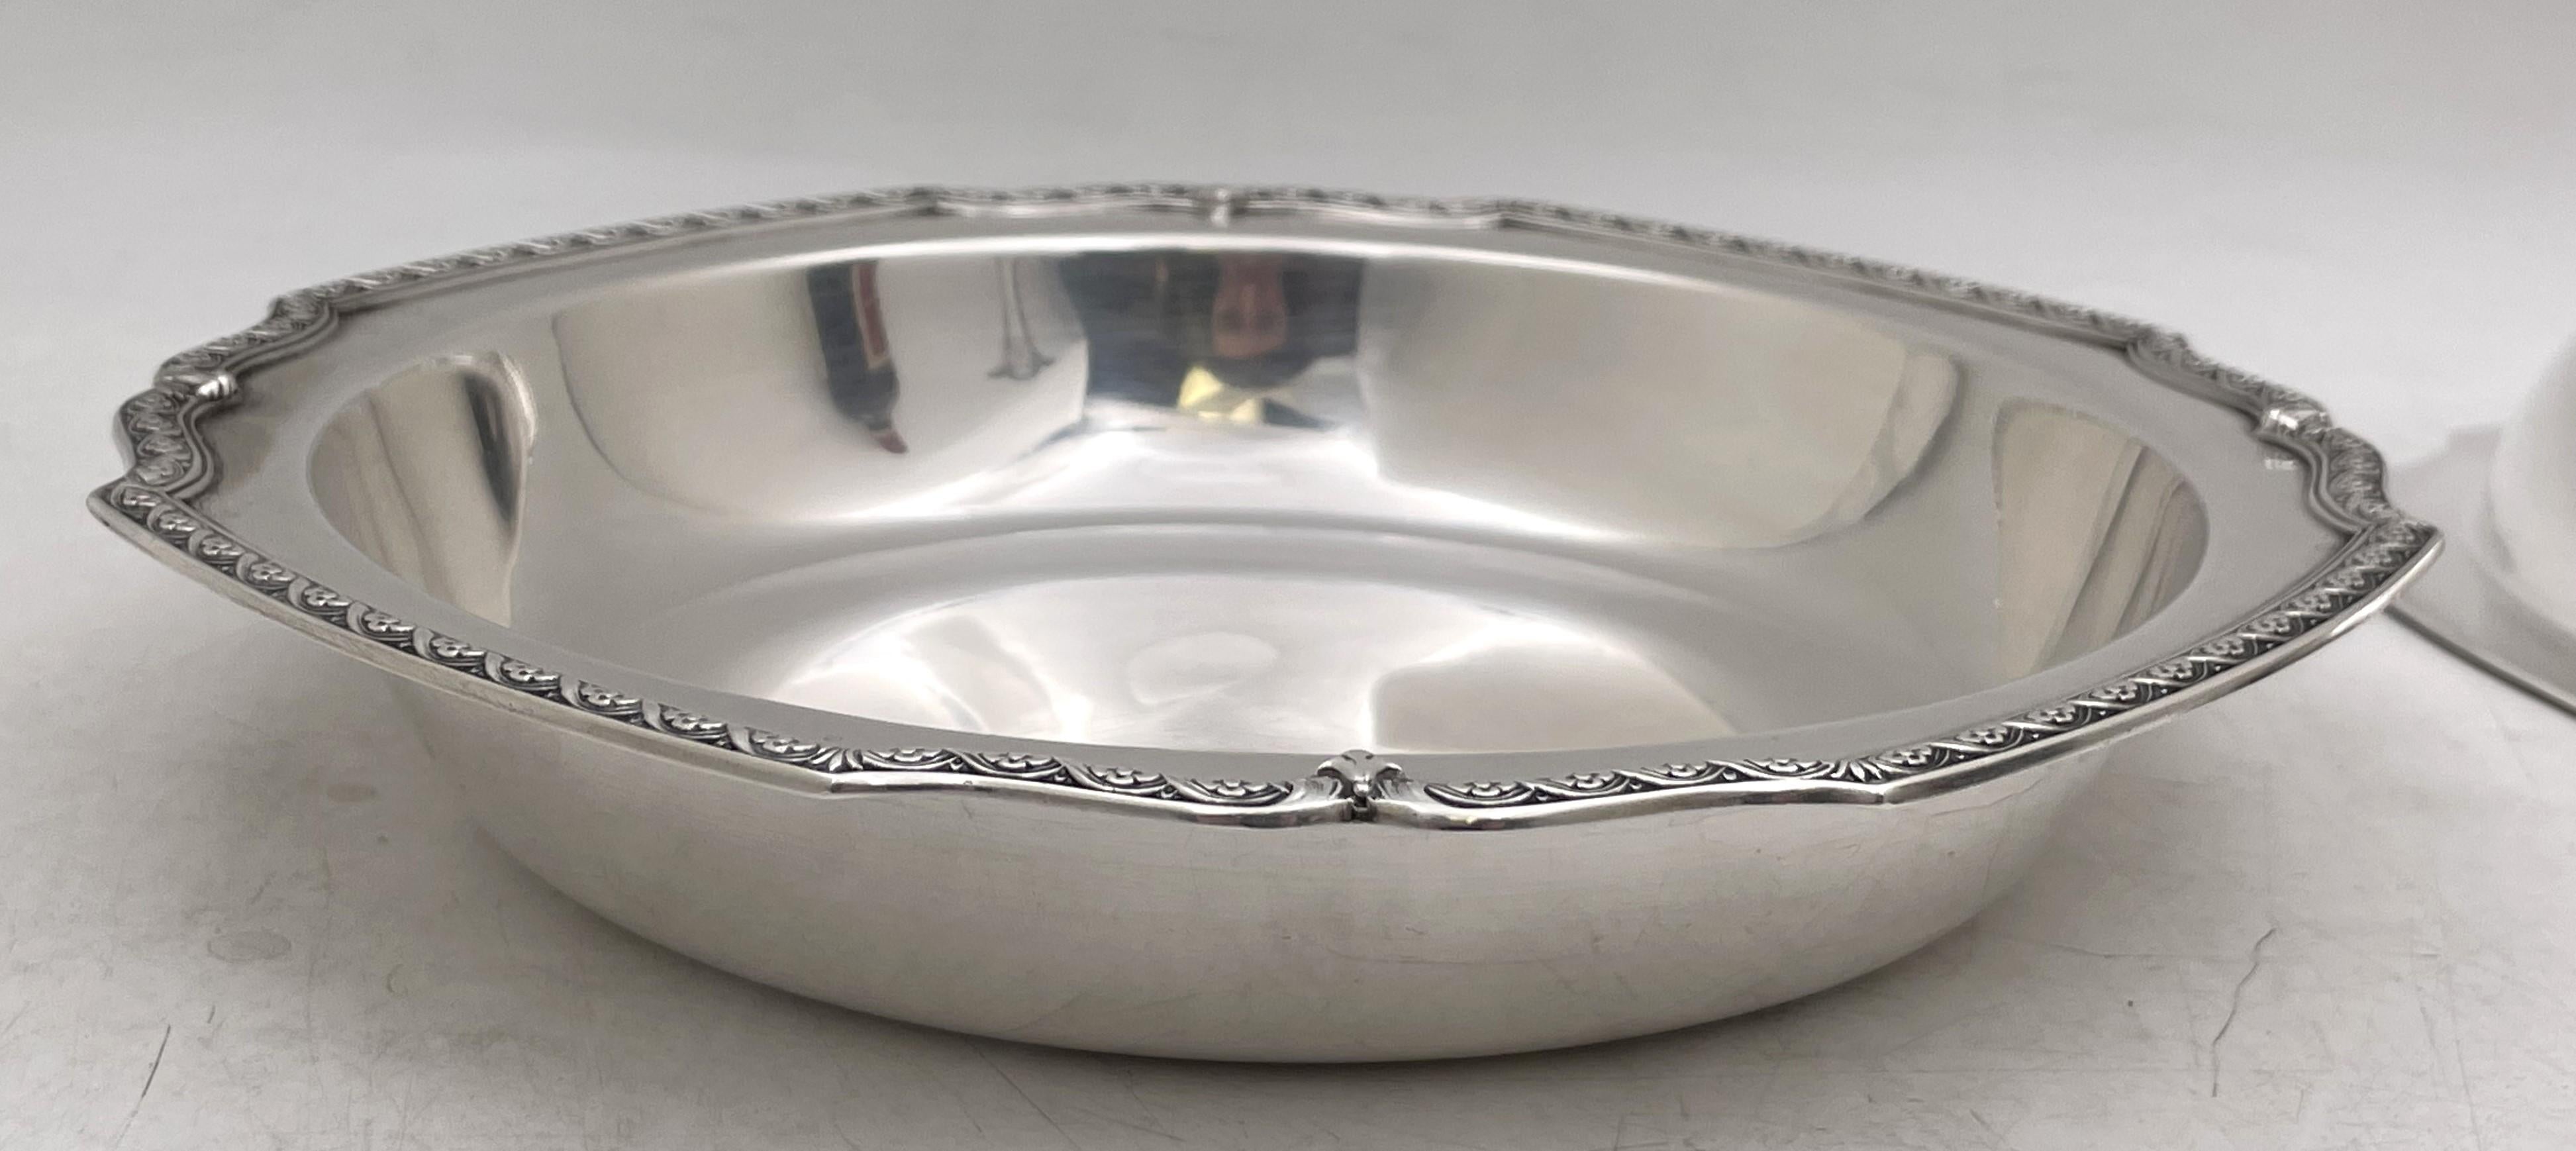 Tiffany & Co. Sterling Silver 1926 Covered Vegetable Dish Pair of Bowls Art Deco In Good Condition For Sale In New York, NY